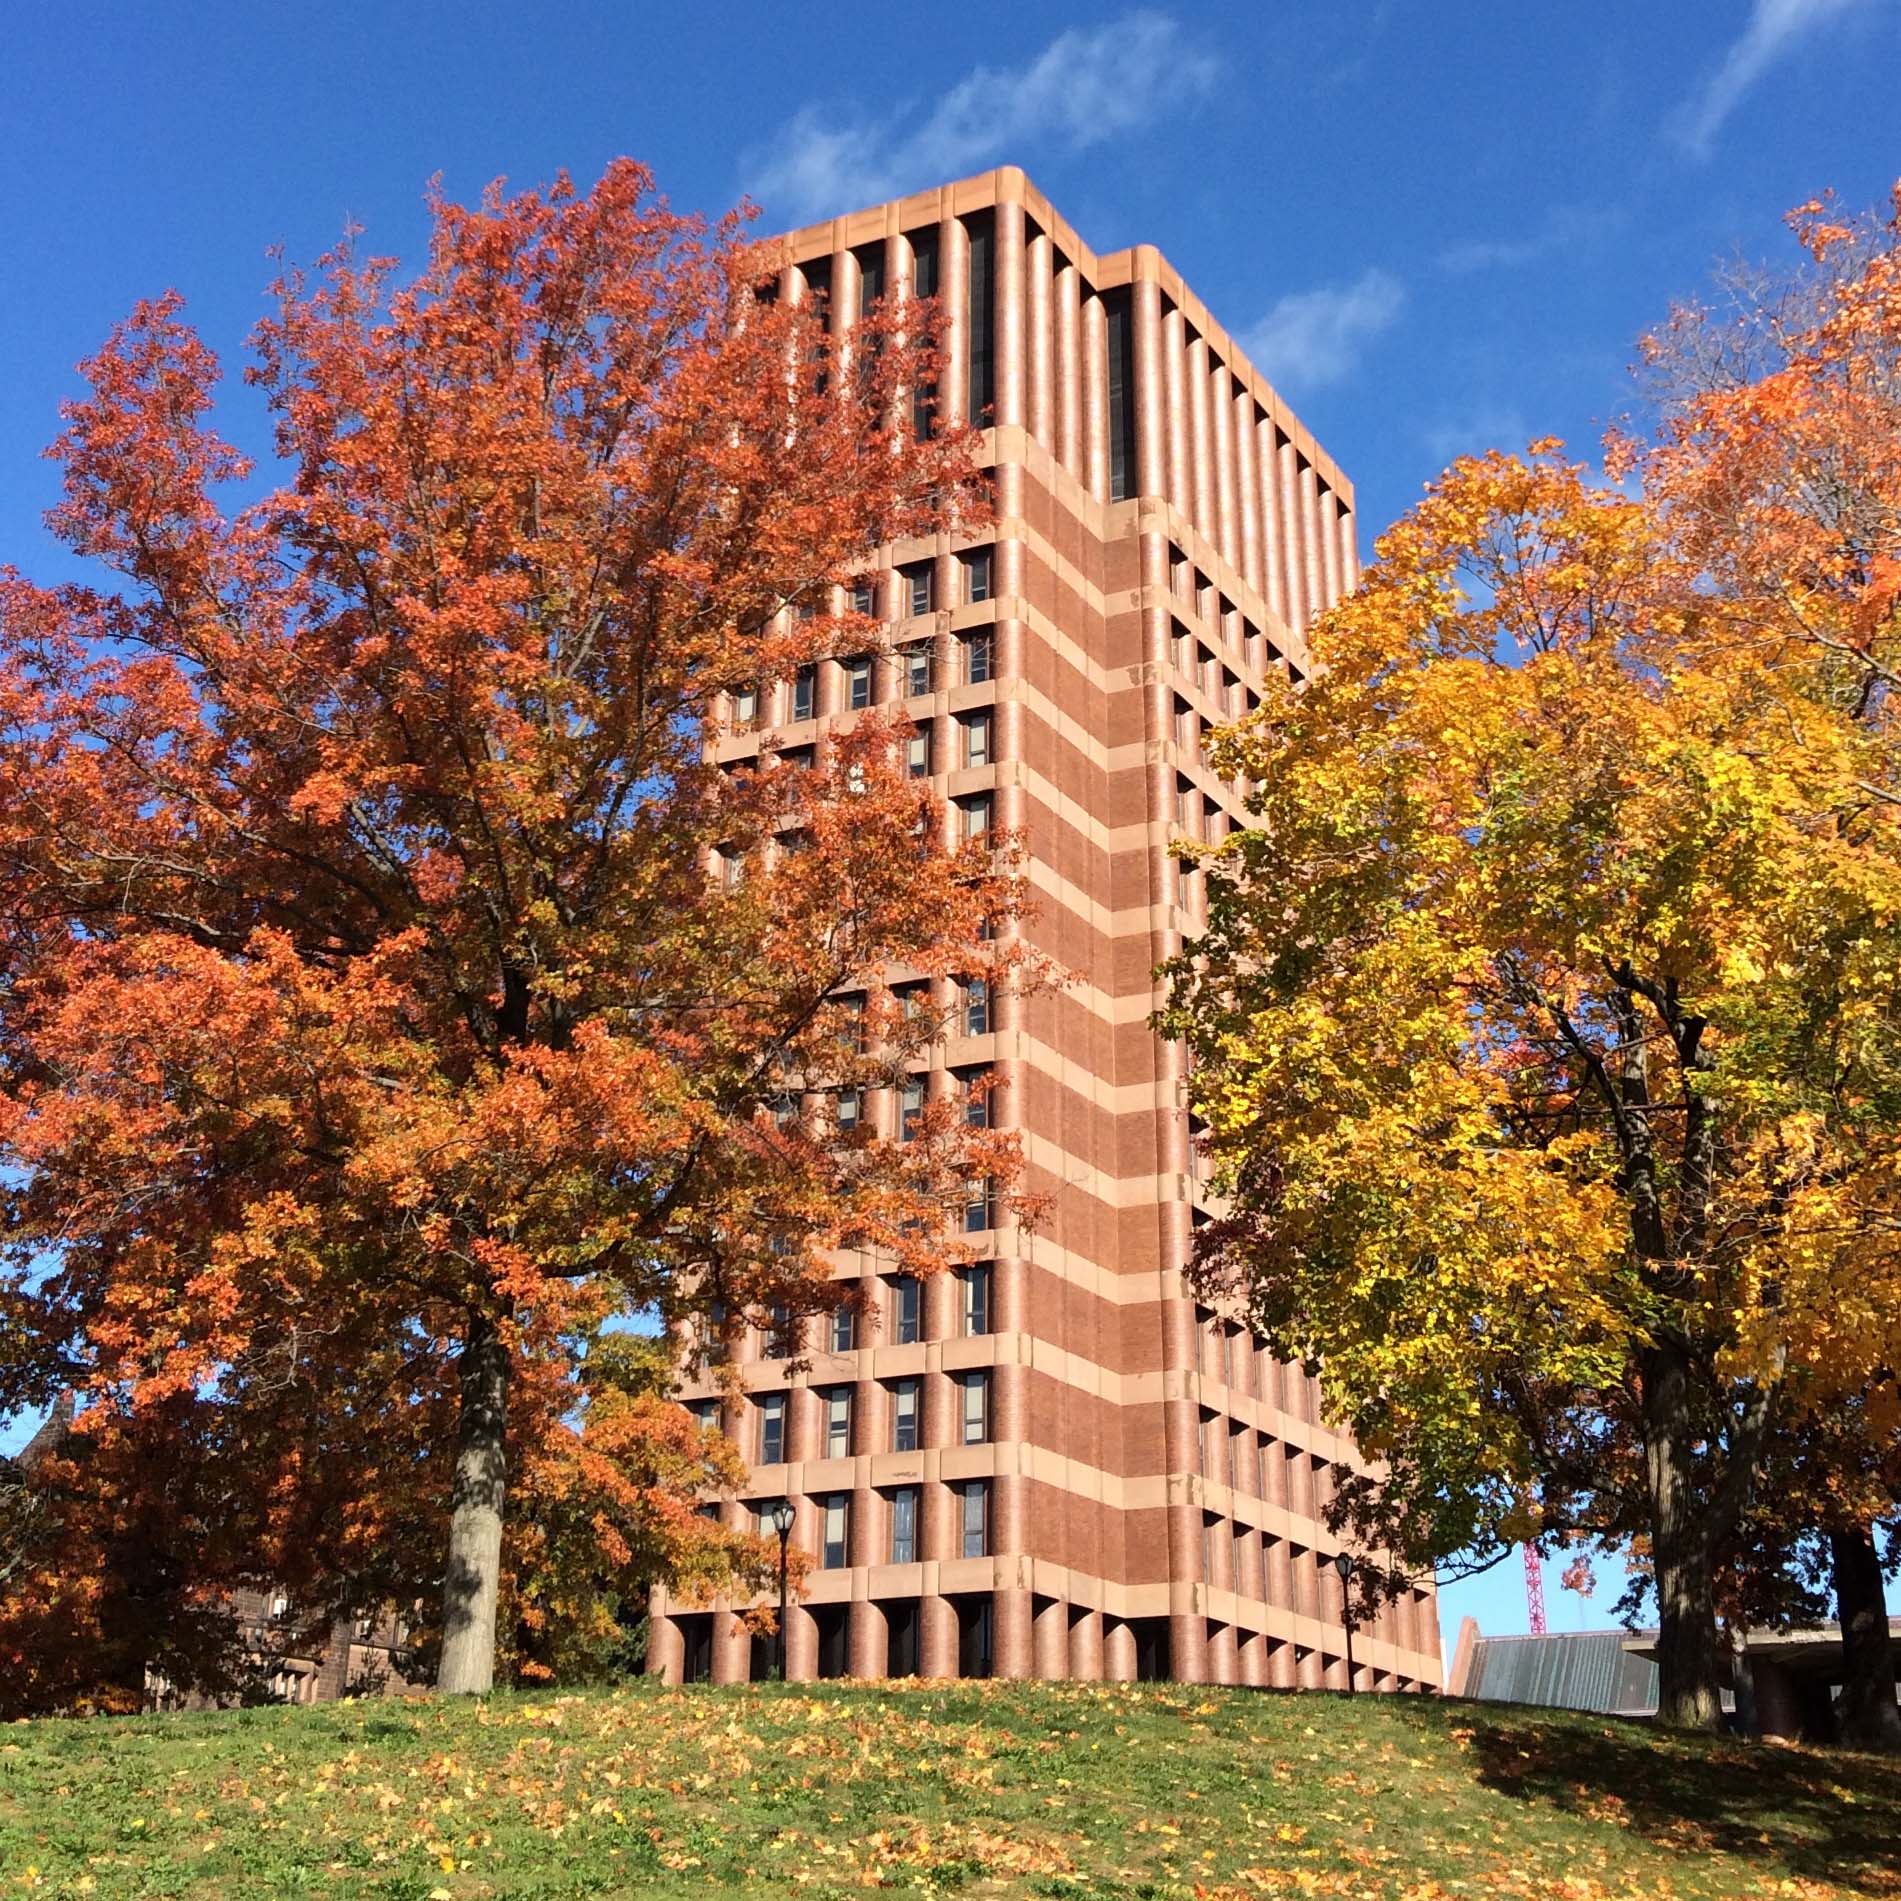 Exterior of Marx Library tower, links to Marx Library website